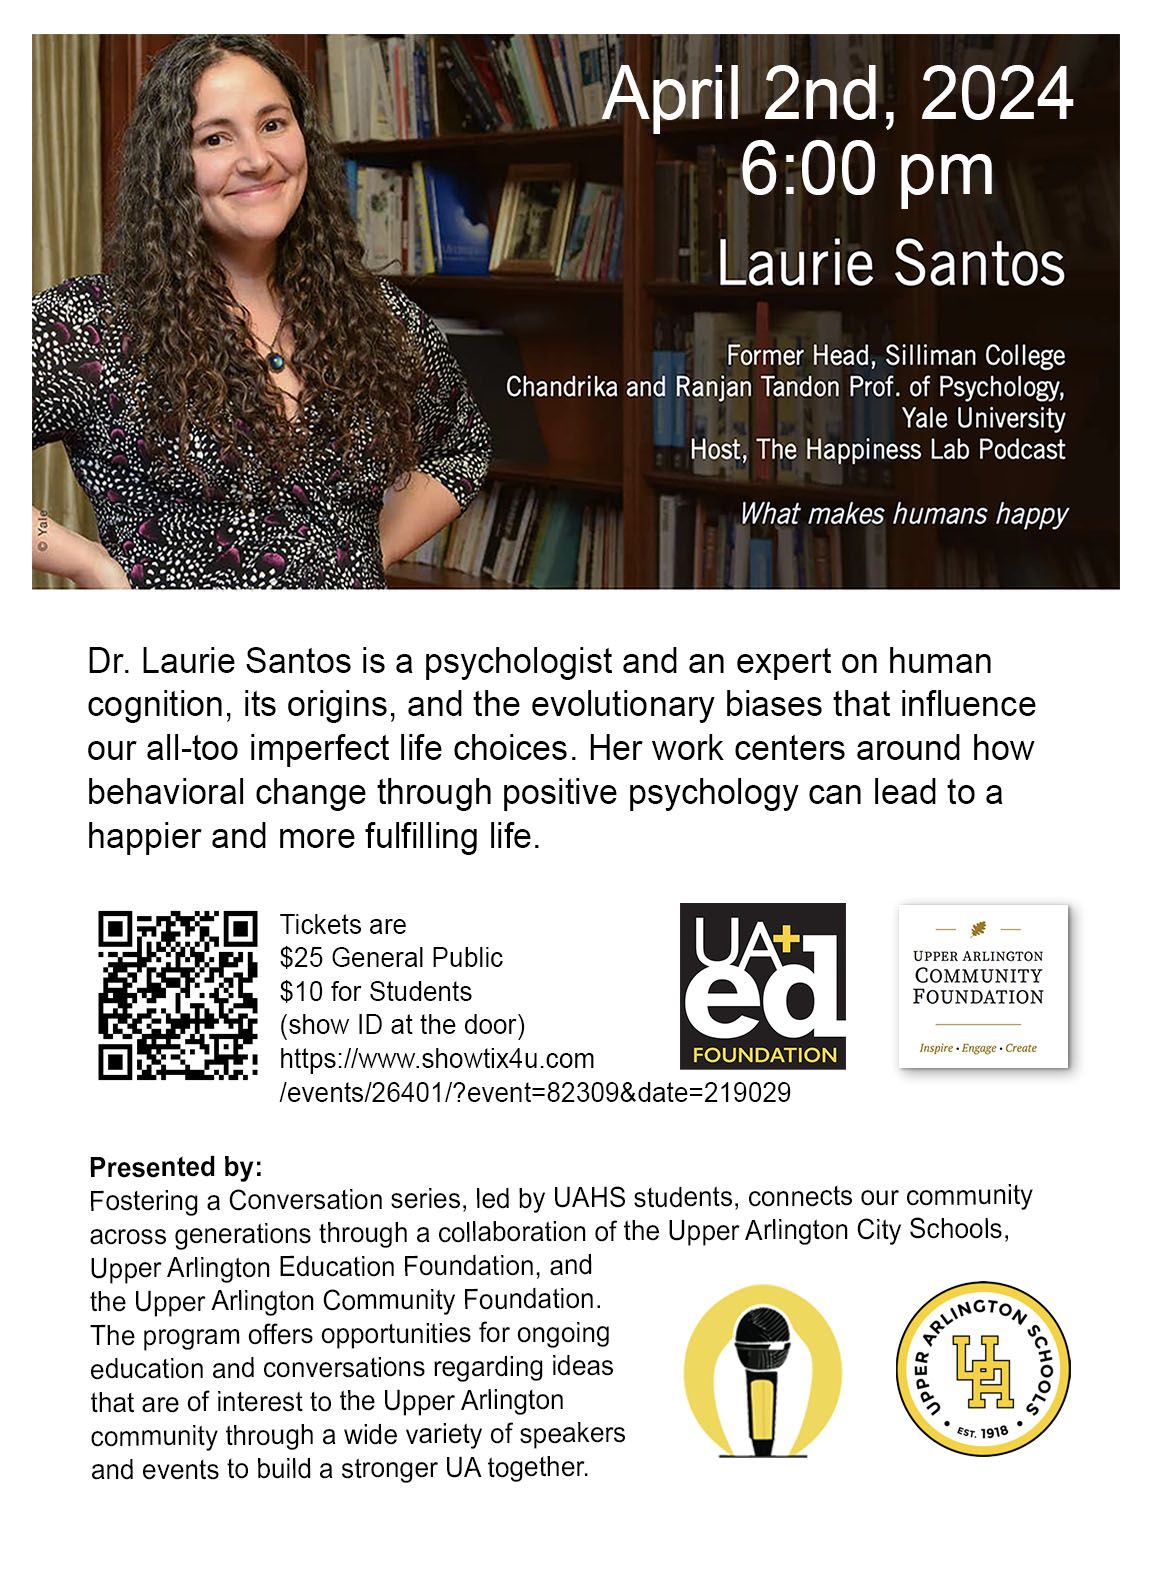 A flyer showing Dr. Laurie Santos and her biographical information with a link to tickets